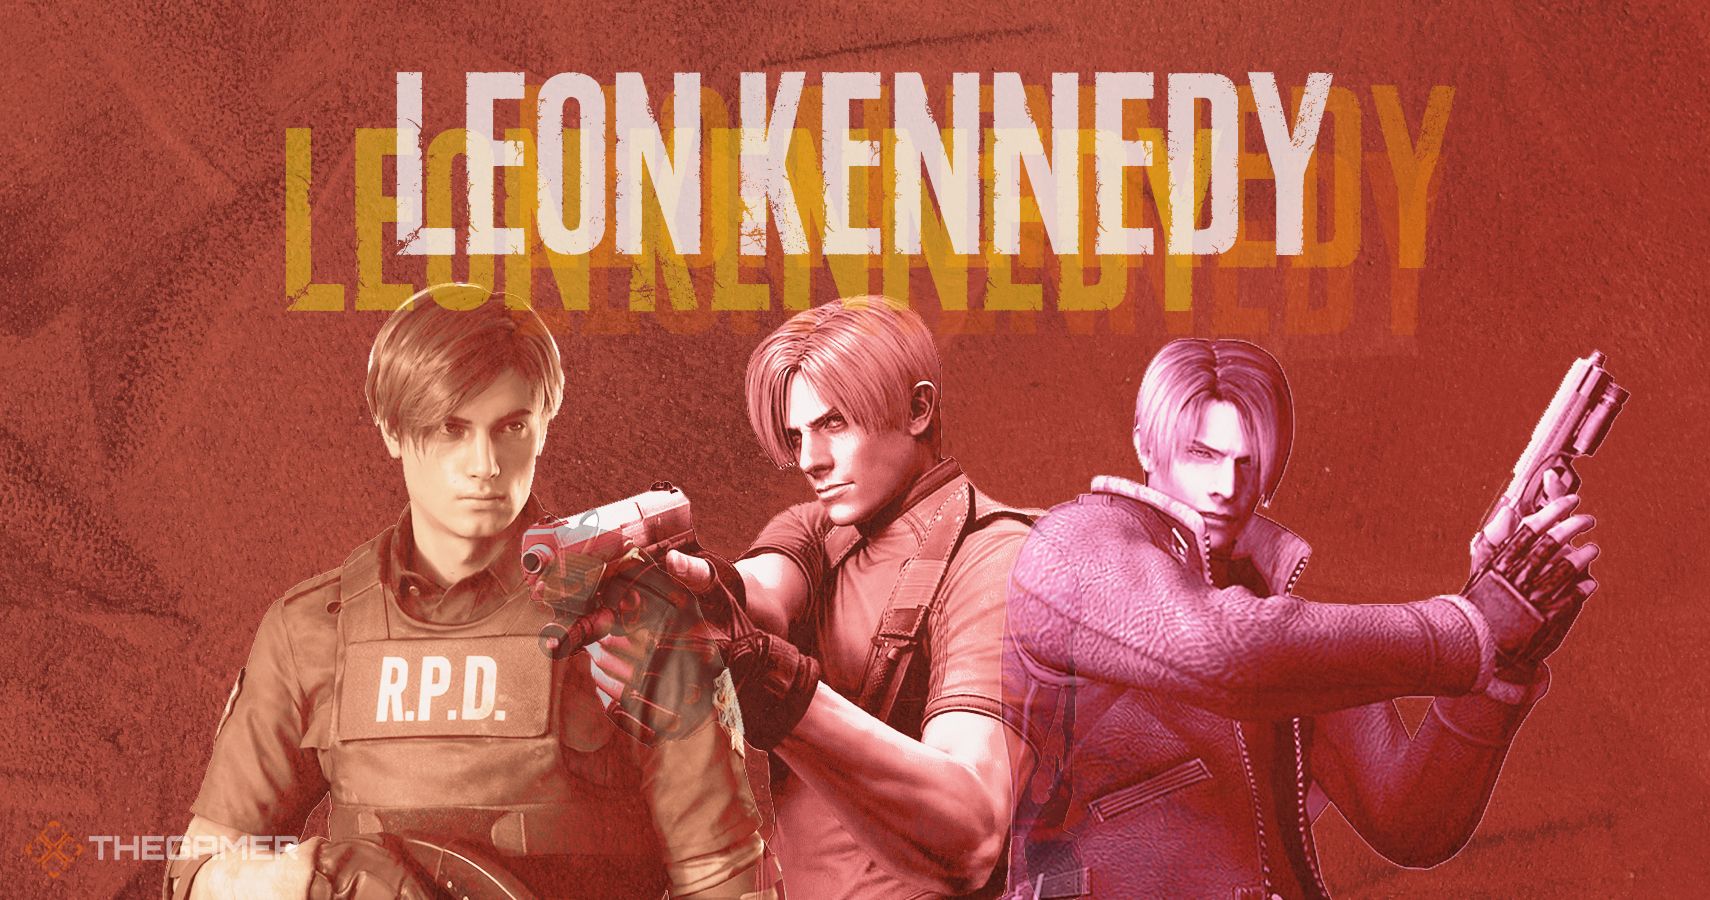 Resident Evil: 10 Chris And Claire Redfield Facts You Never Knew